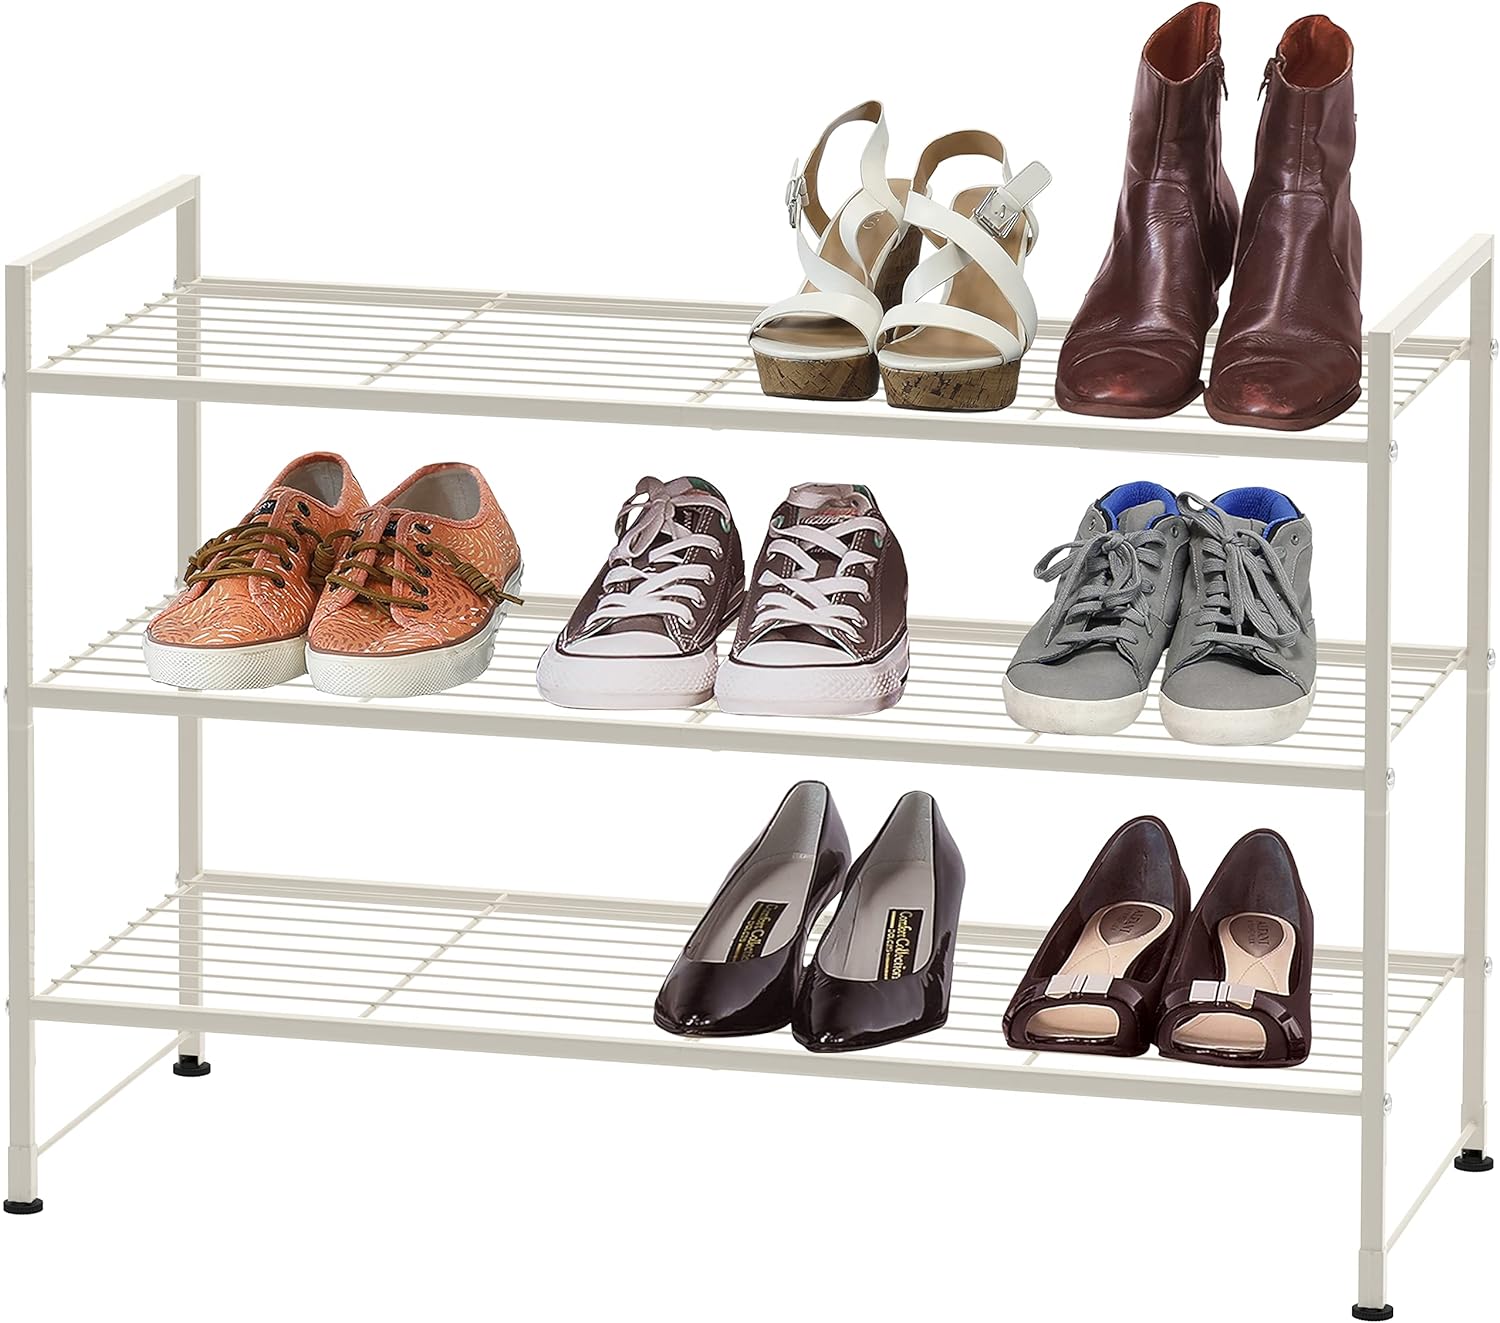 Save Big on Simple Houseware 3-Tier Stackable Shoes Rack Storage Shelf, Now Only $21.57